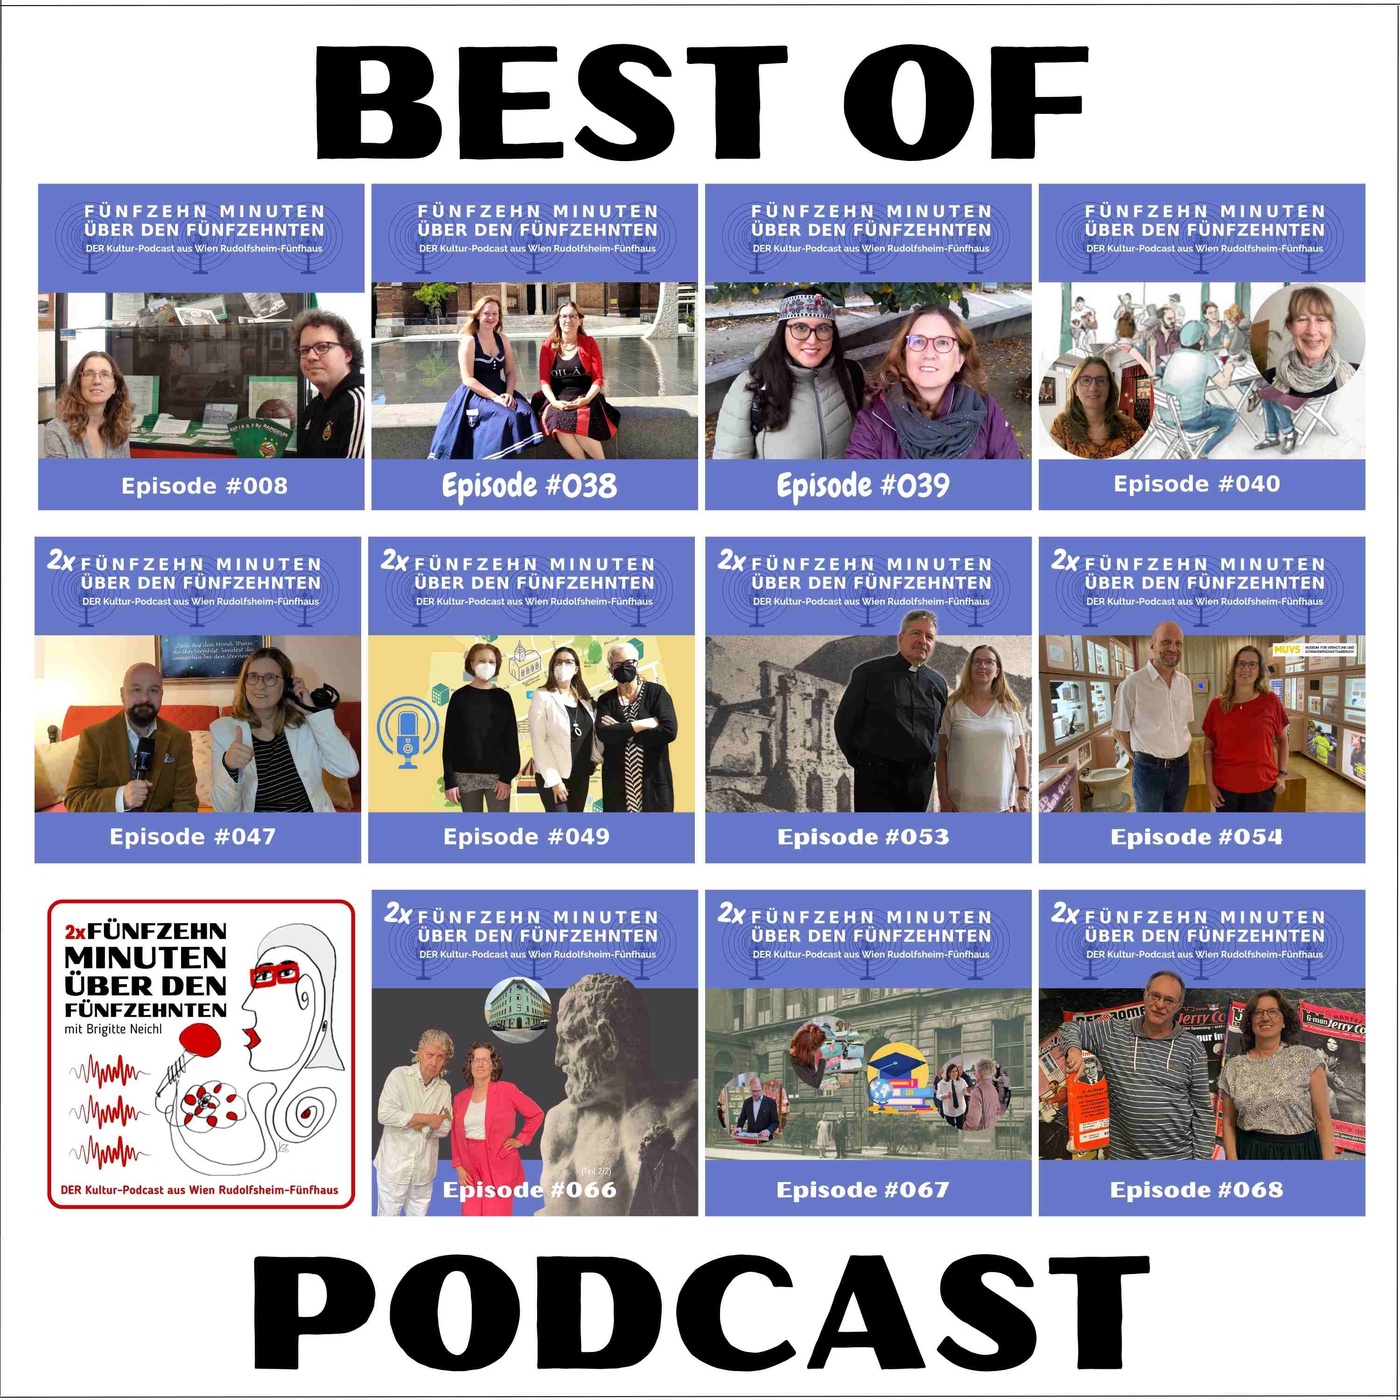 #071 Best of Podcast